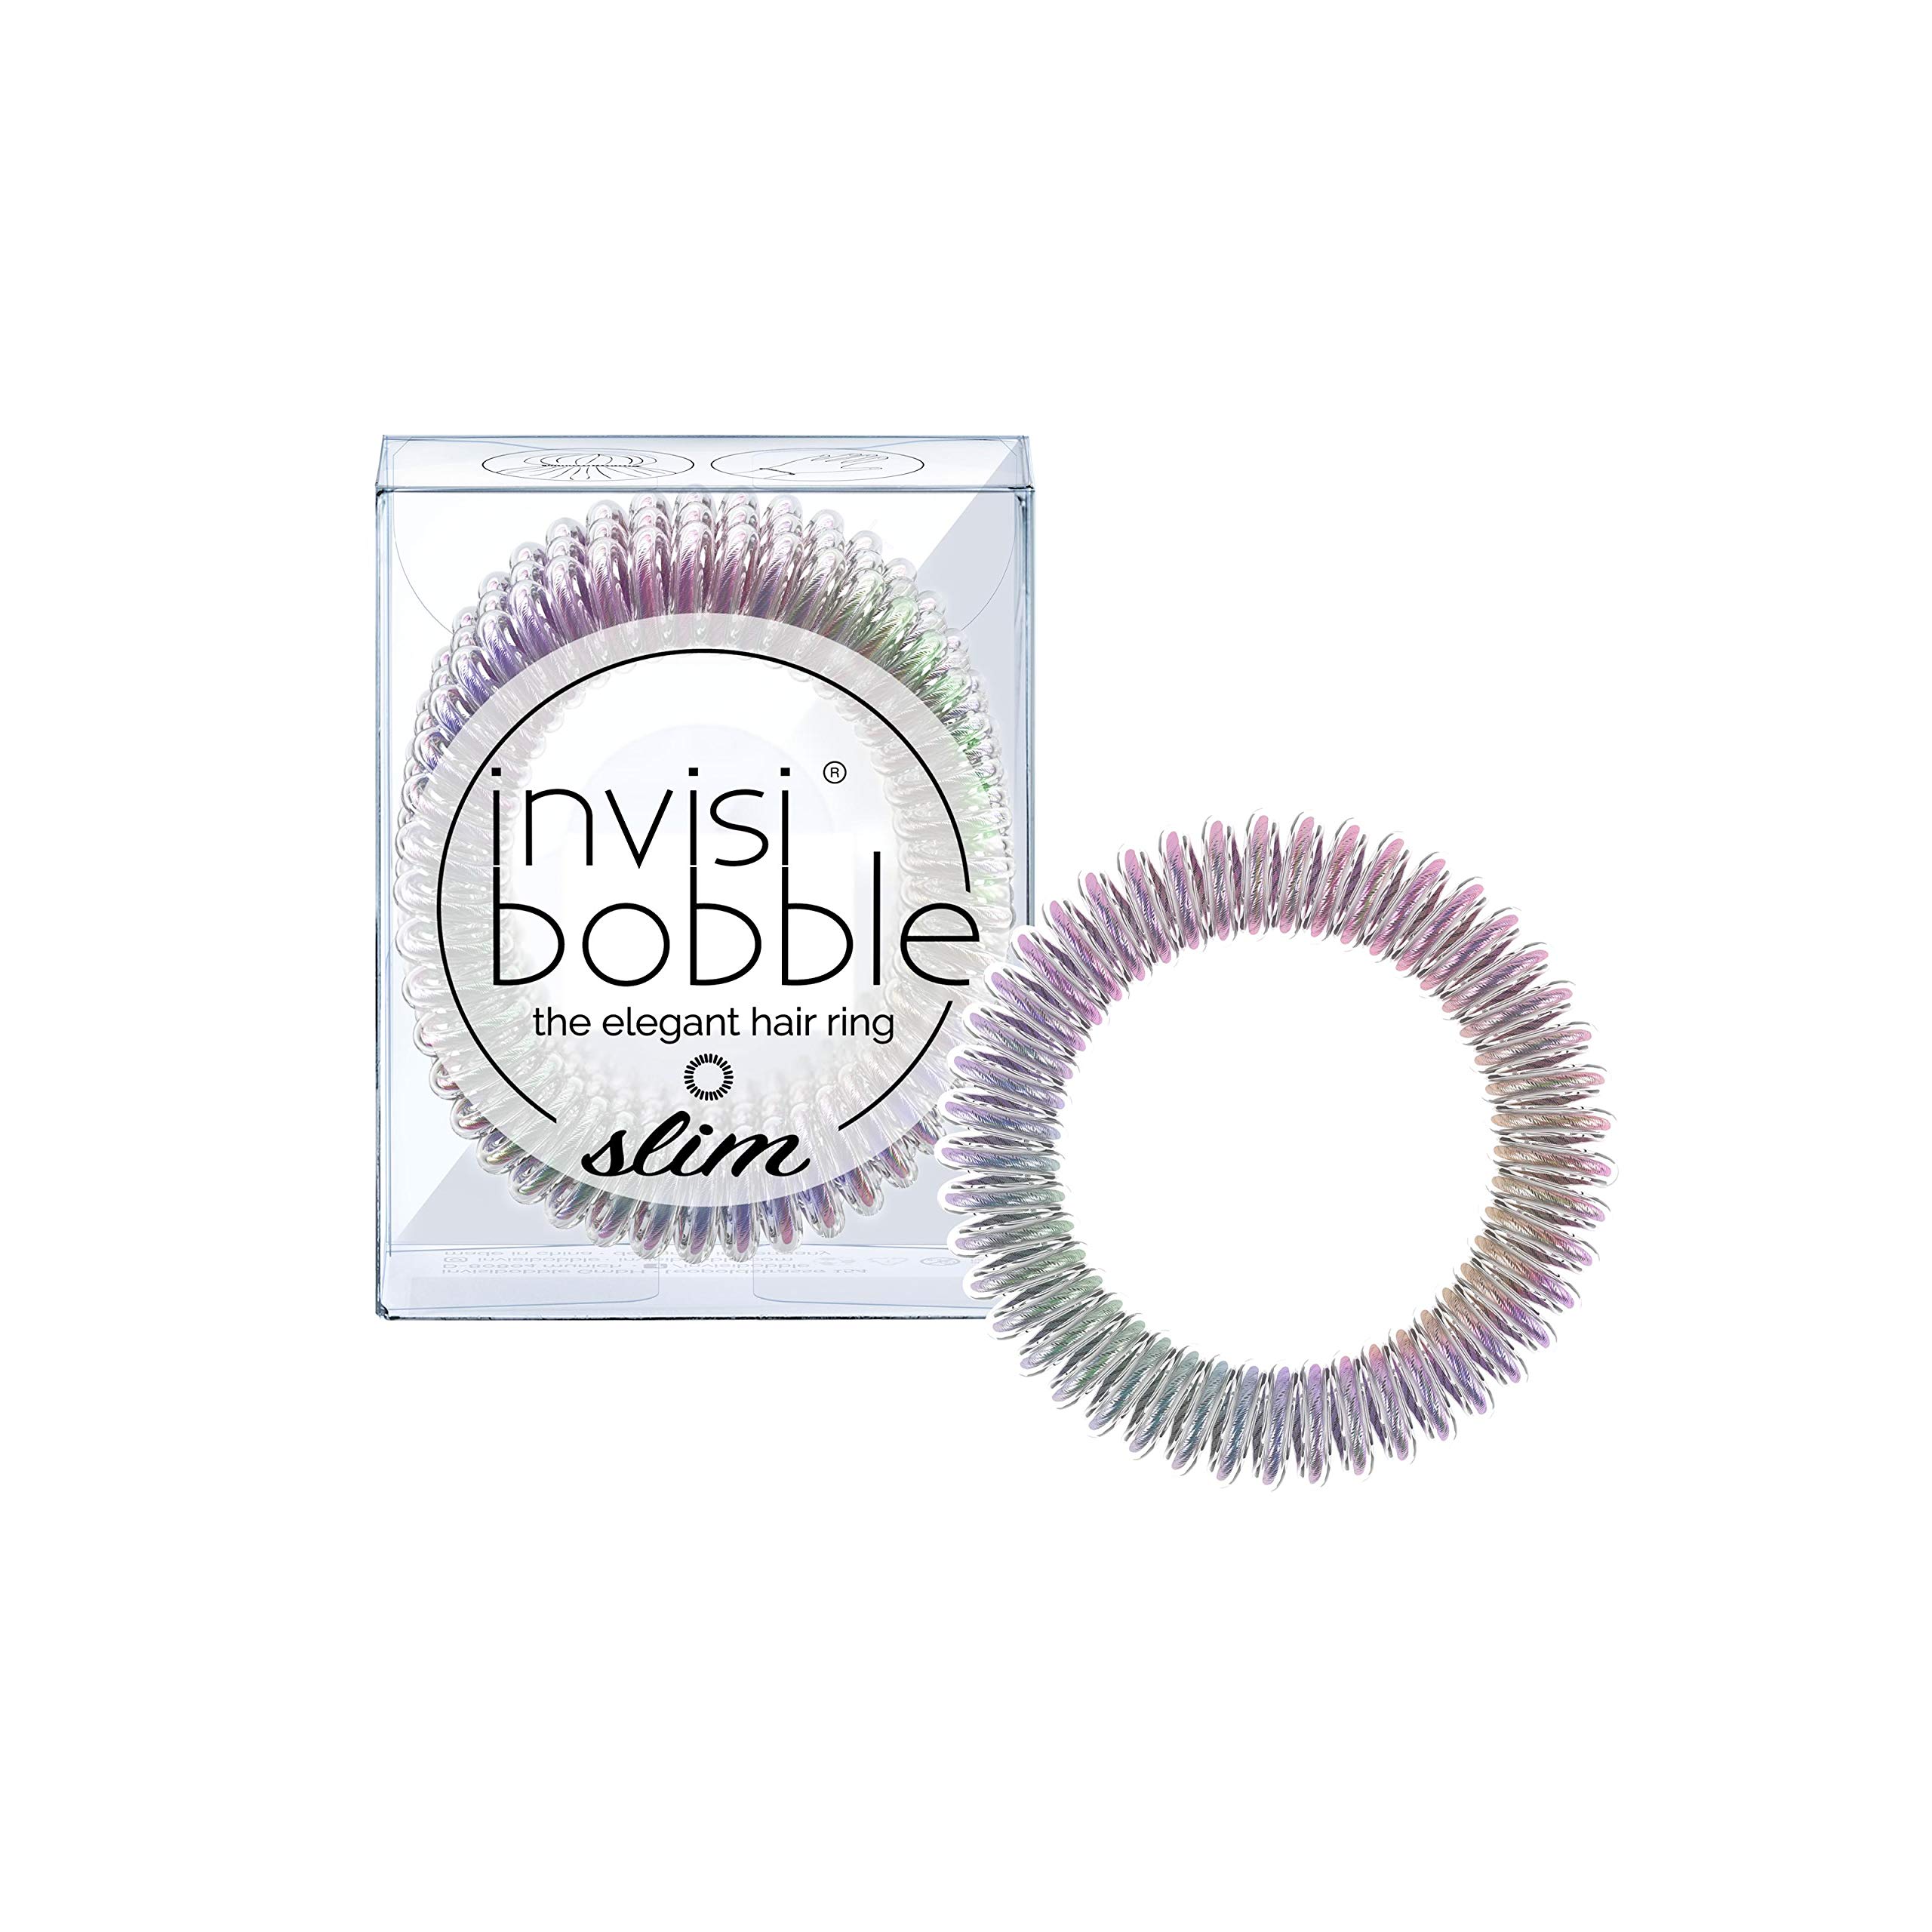 invisibobble SLIM Traceless Spiral Hair Ties - Pack of 3, Vanity Fairy - Strong Elastic Grip Coil Hair Accessories for Women - No Kink, Non Soaking - Gentle for Girls Teens and Thick Hair